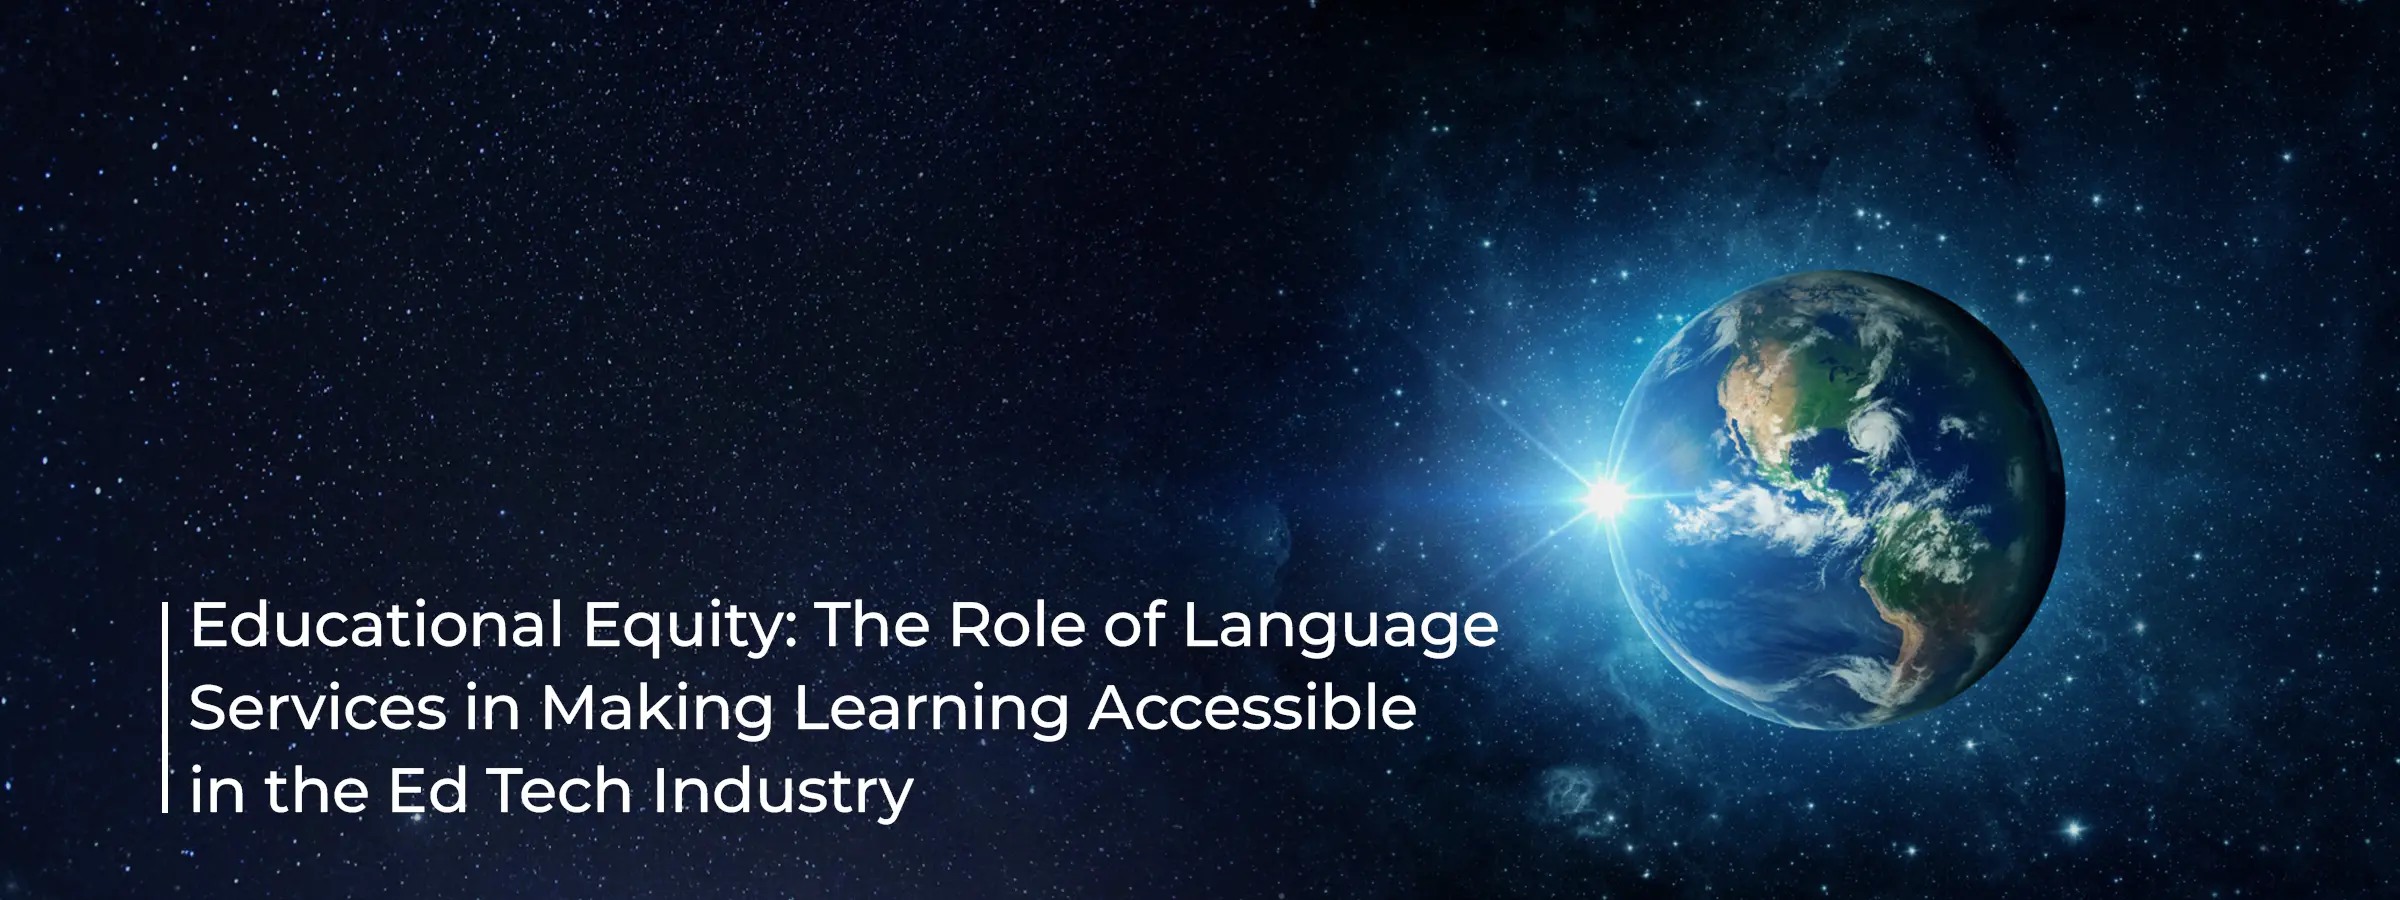 language-services-in-making-learning-accessible-in-the-ed-tech-industry